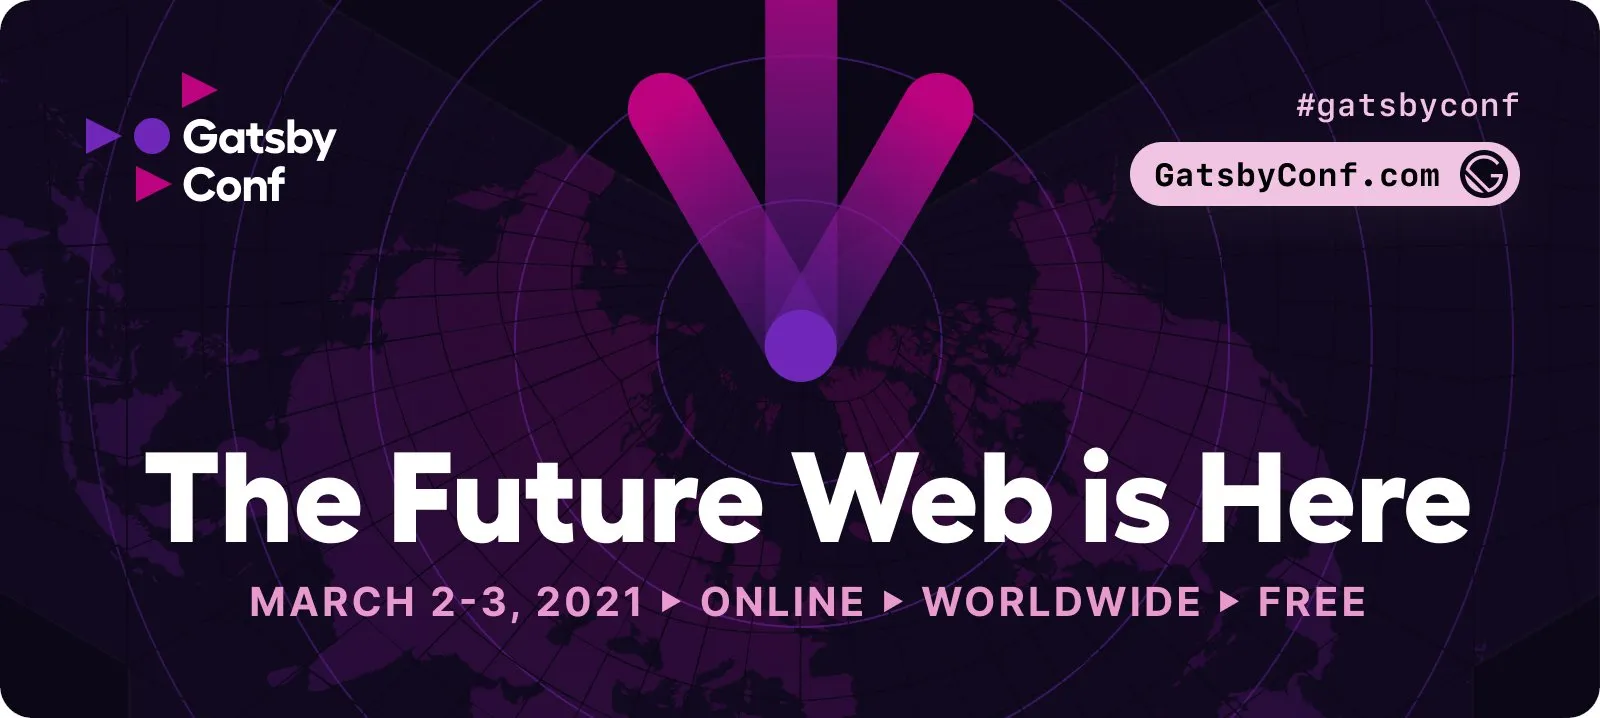 Gatsby Conf announcement 2021: the future web is here